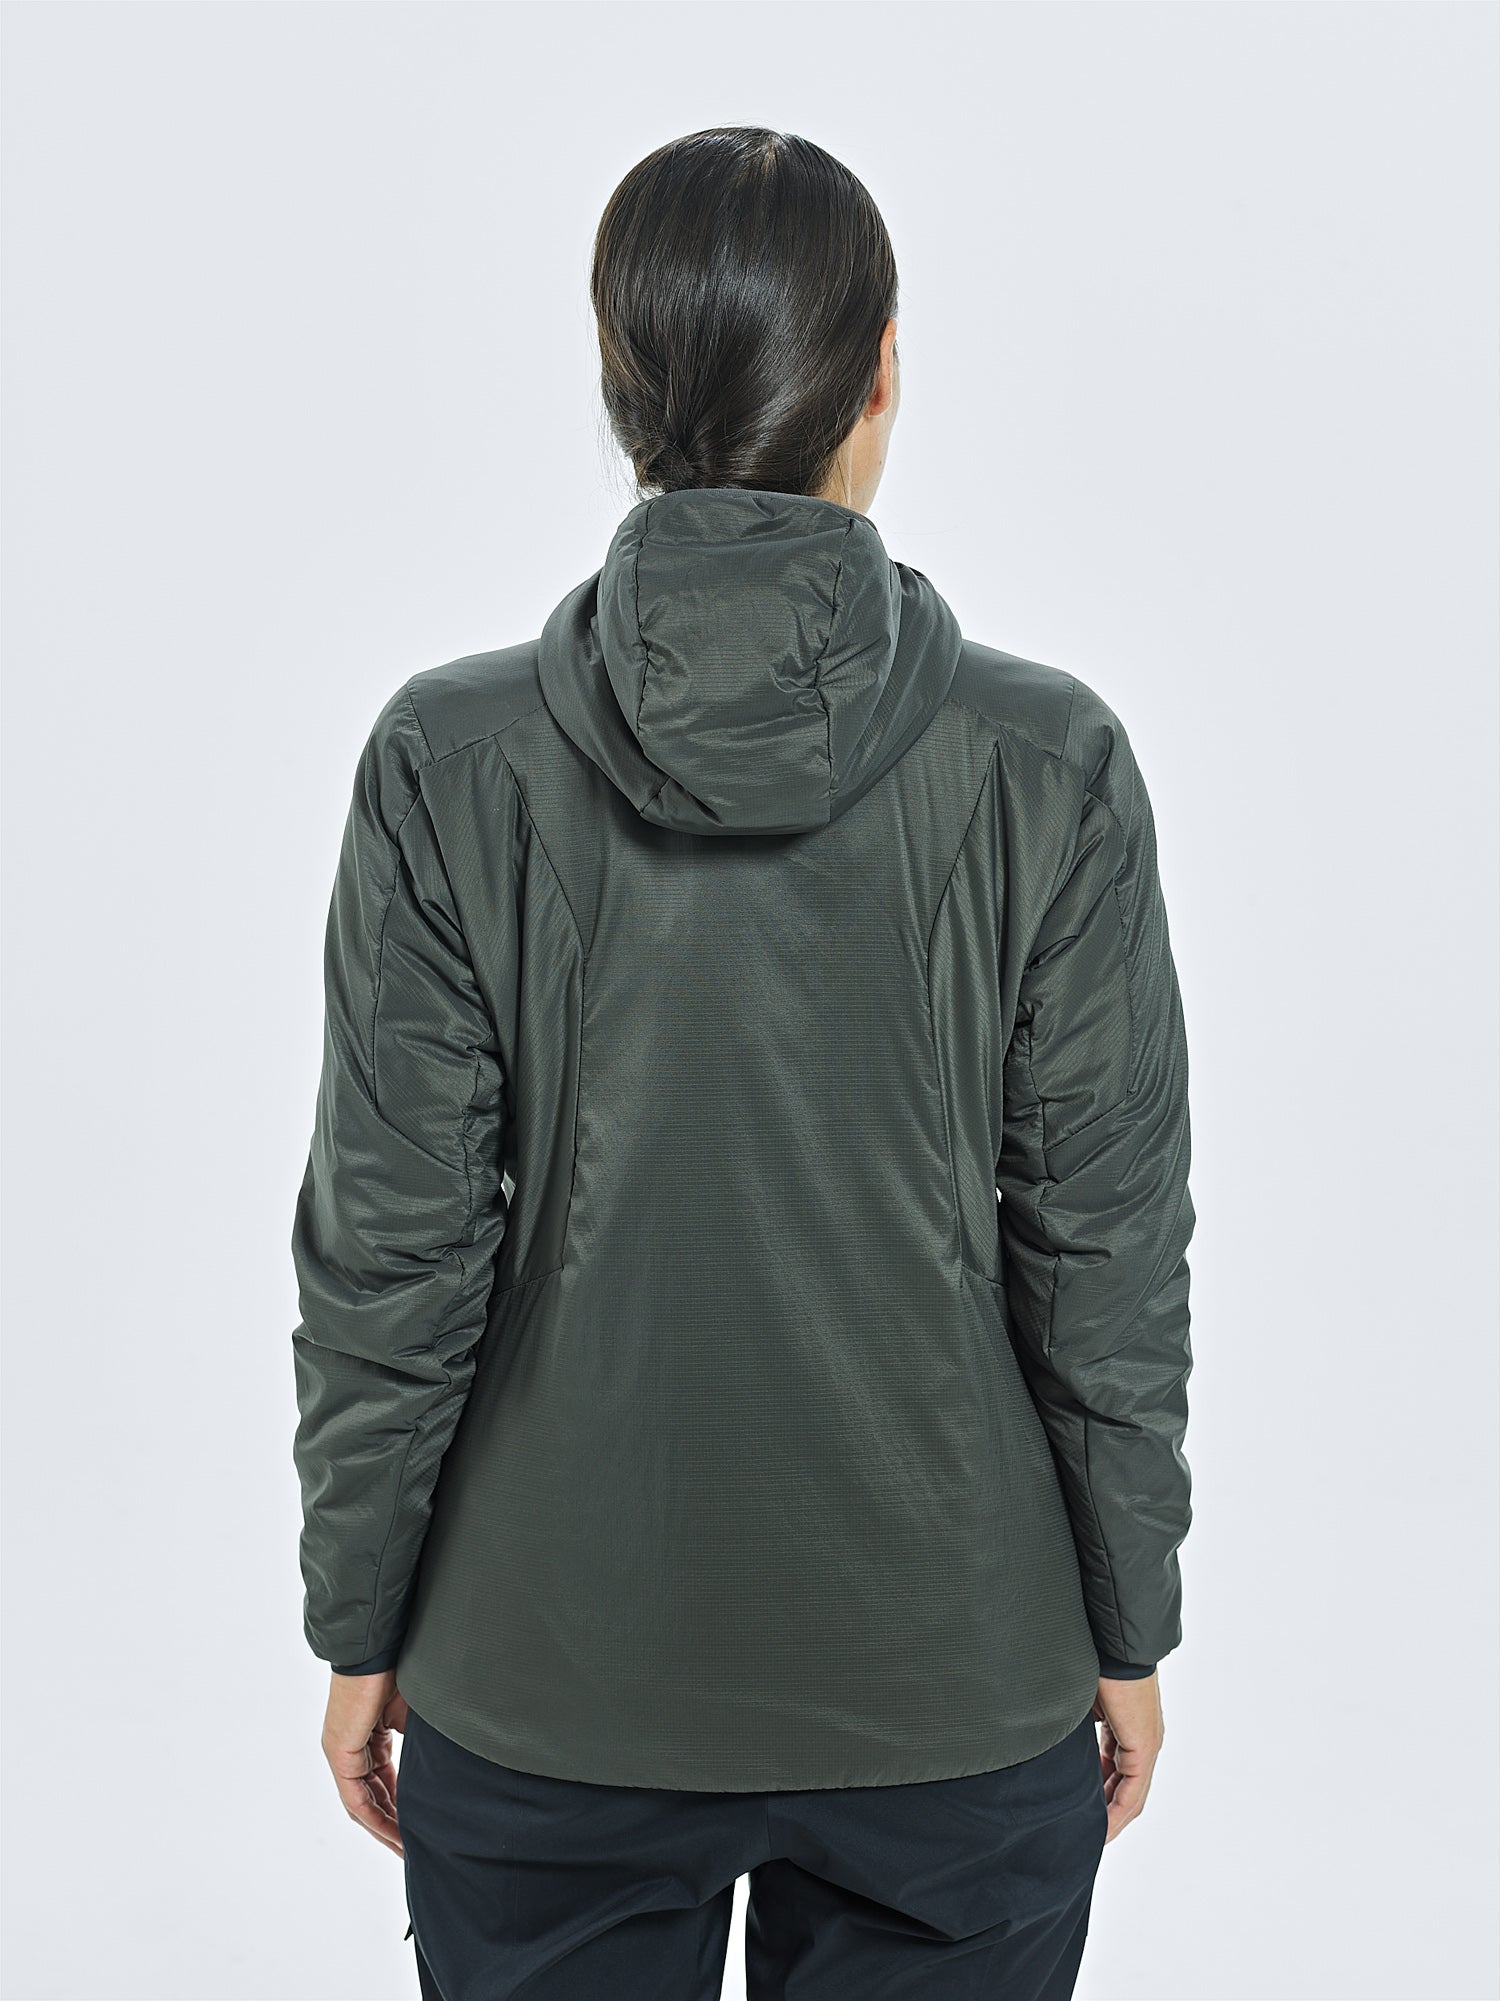 Lululemon Insulated Ripstop Hoodie Review